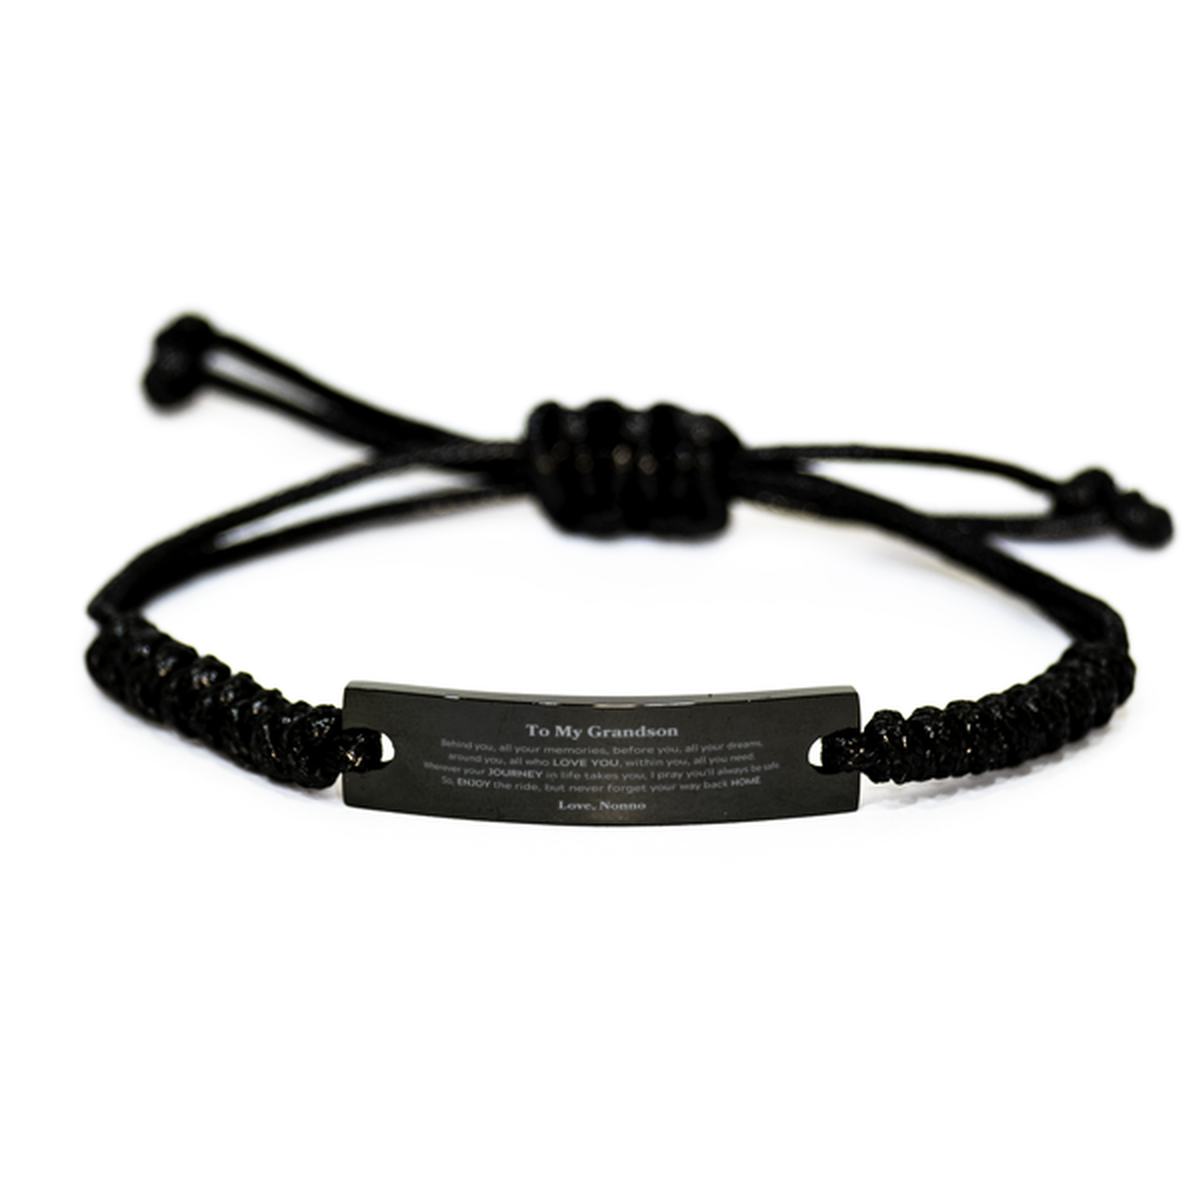 To My Grandson Graduation Gifts from Nonno, Grandson Black Rope Bracelet Christmas Birthday Gifts for Grandson Behind you, all your memories, before you, all your dreams. Love, Nonno